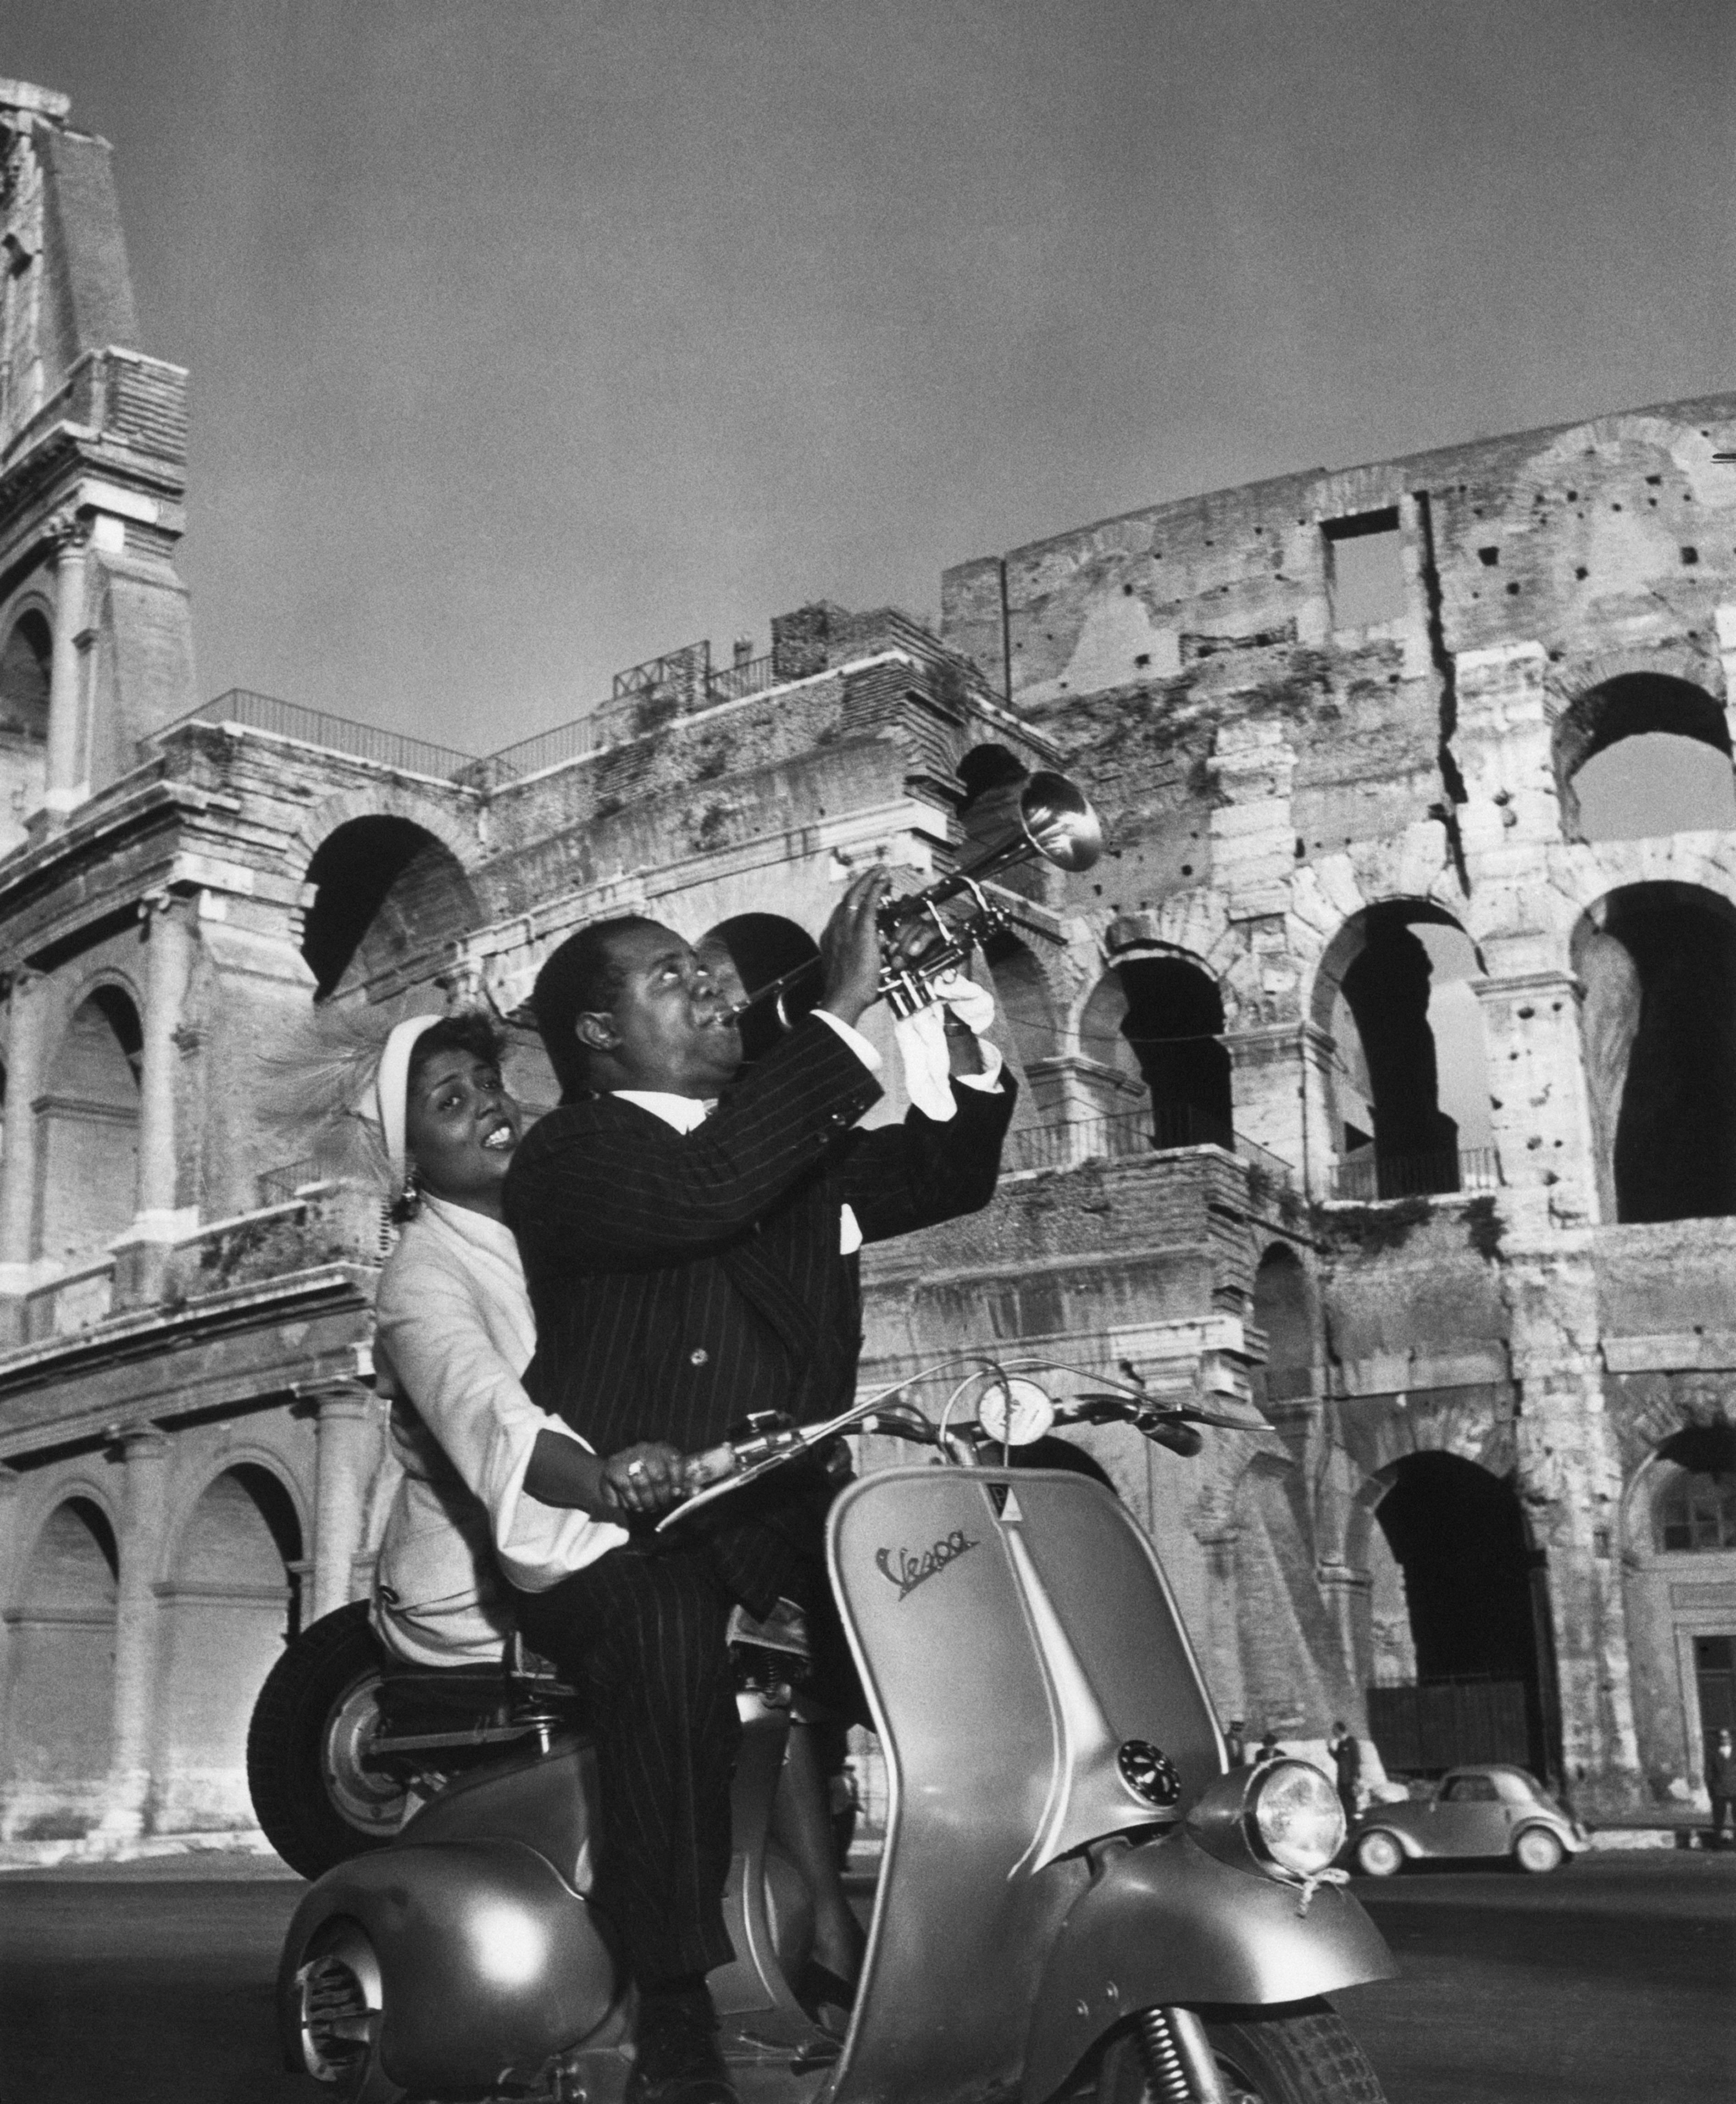 Lucille Brown takes control of the Vespa scooter as her husband Louis Armstrong (1898 - 1971) displays his musical appreciation of the ancient Colosseum in Rome. (Photo by Slim Aarons/Getty Images)

C-type print from the original transparency held